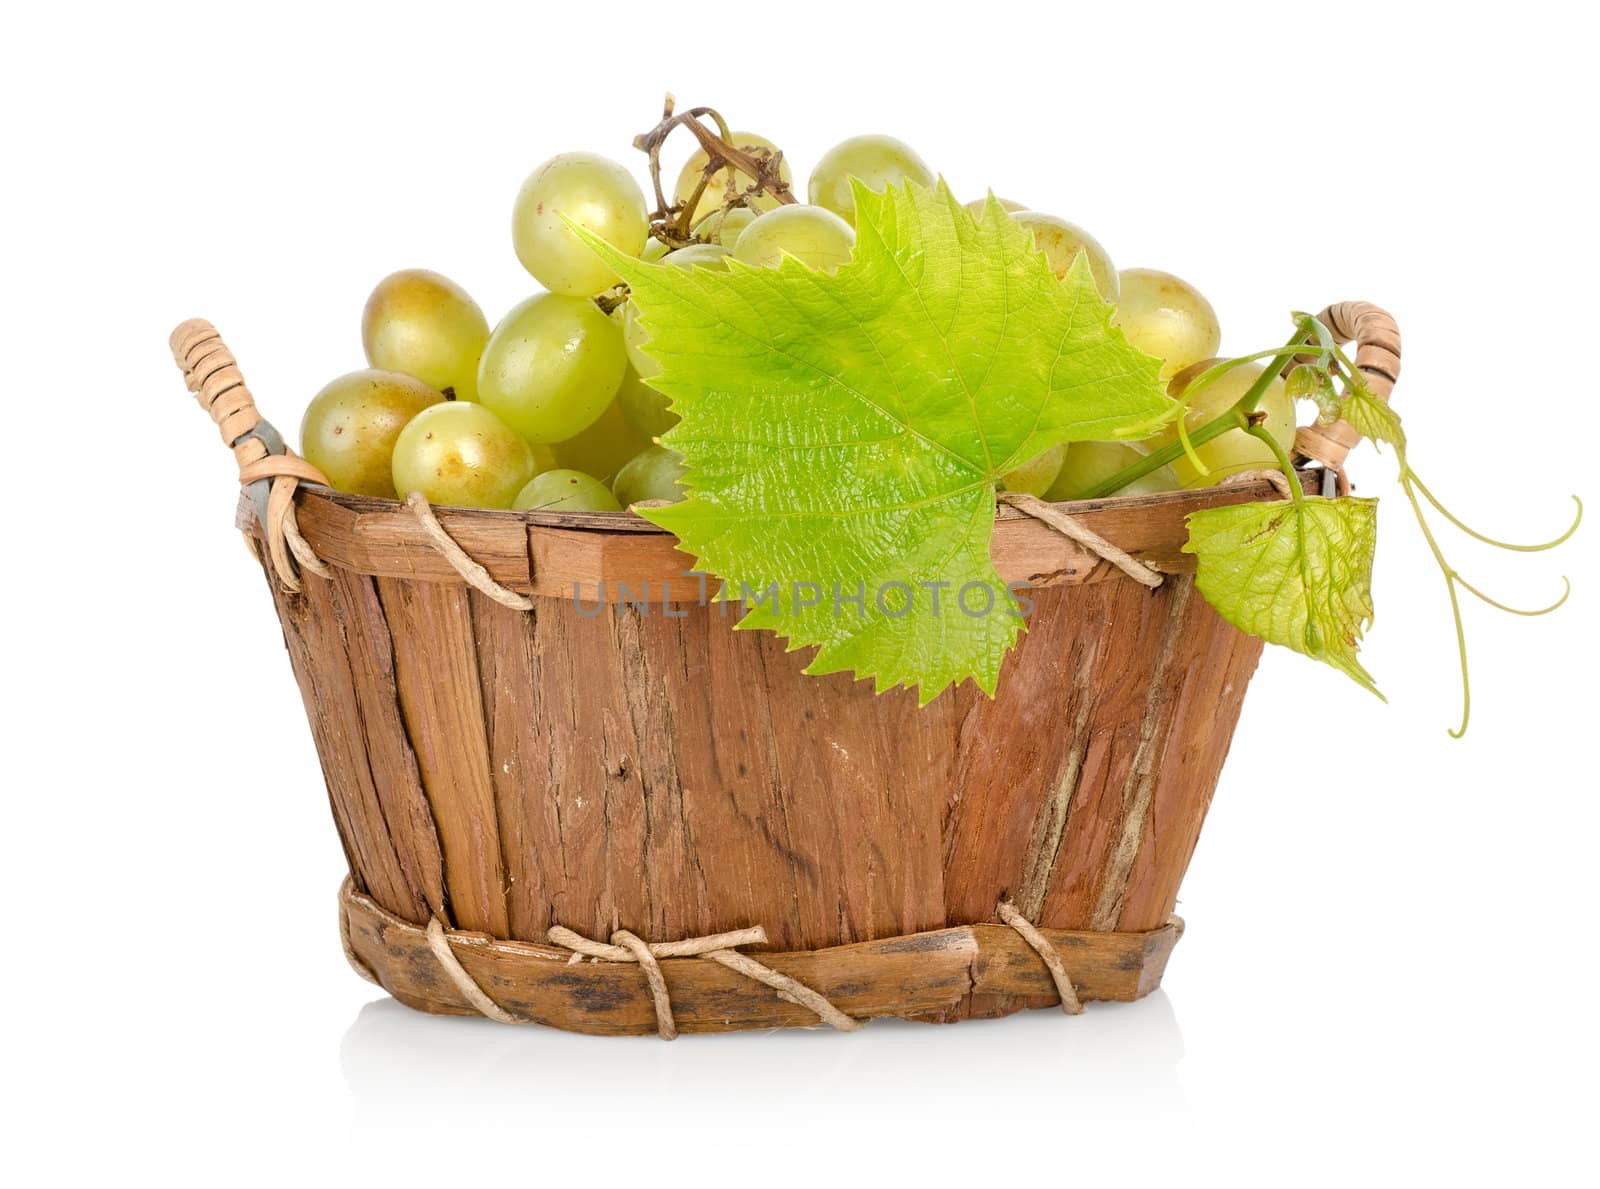 Grapes in a wooden basket isolated on white background